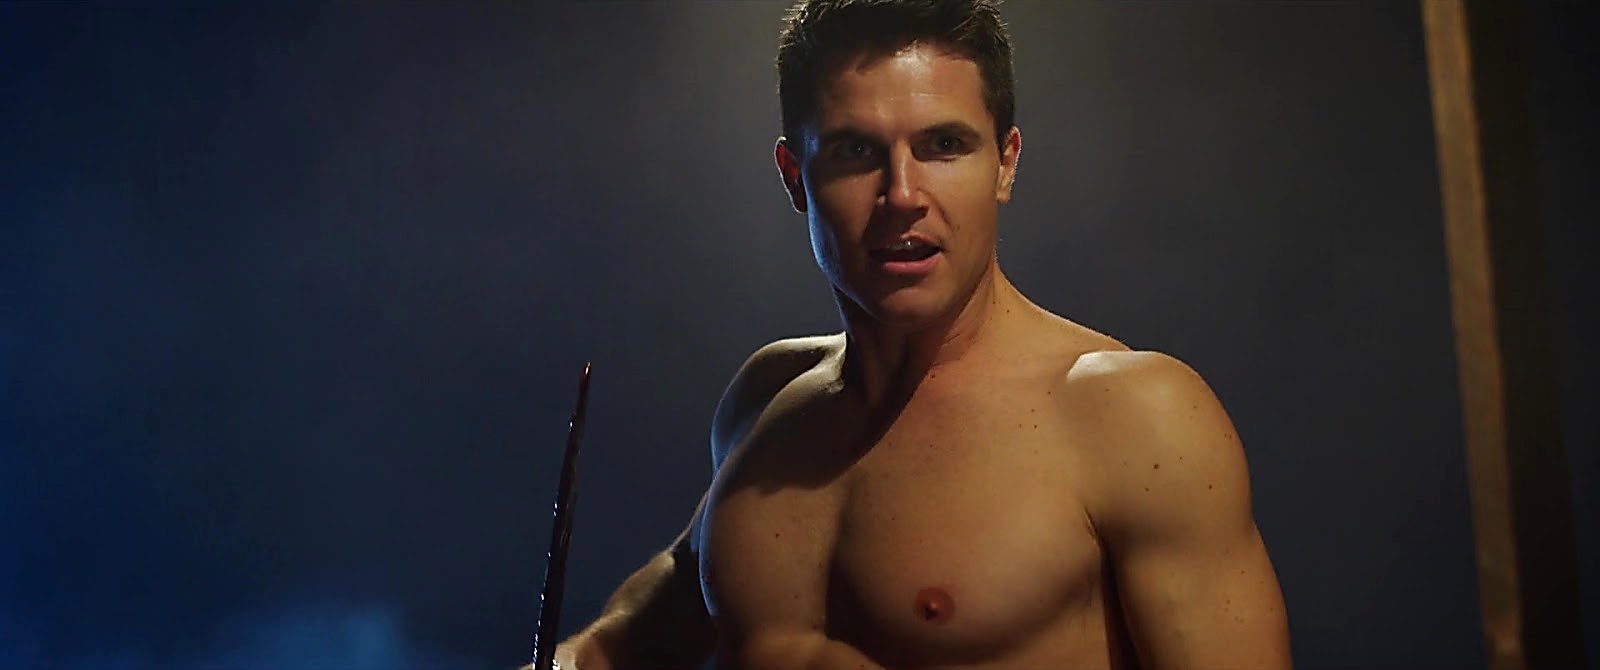 Robbie Amell sexy shirtless scene September 10, 2020, 8am